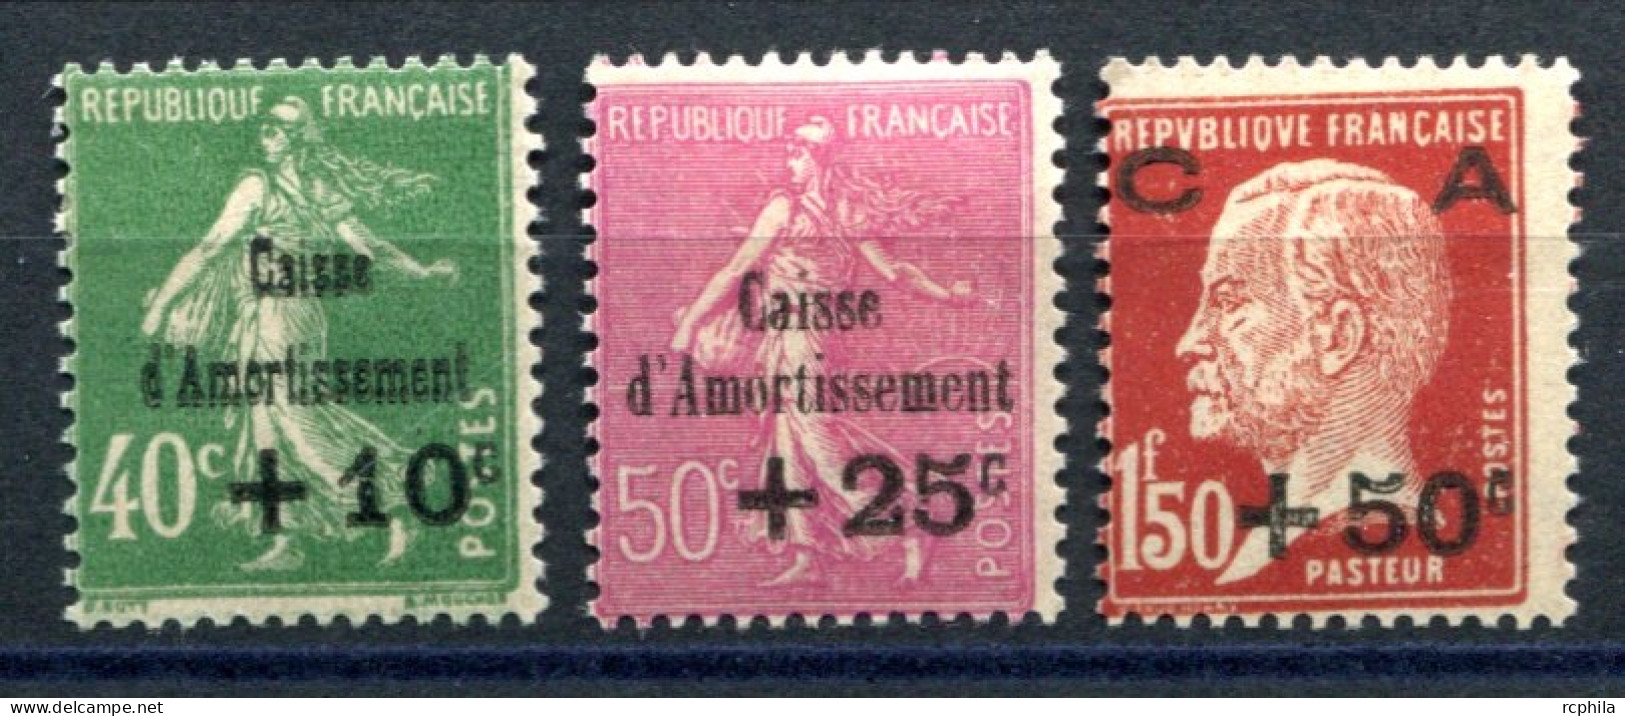 RC 27574 FRANCE COTE 120€ N° 253 / 255 SERIE CAISSE D'AMORTISSEMENT NEUF * MN TB - Neufs